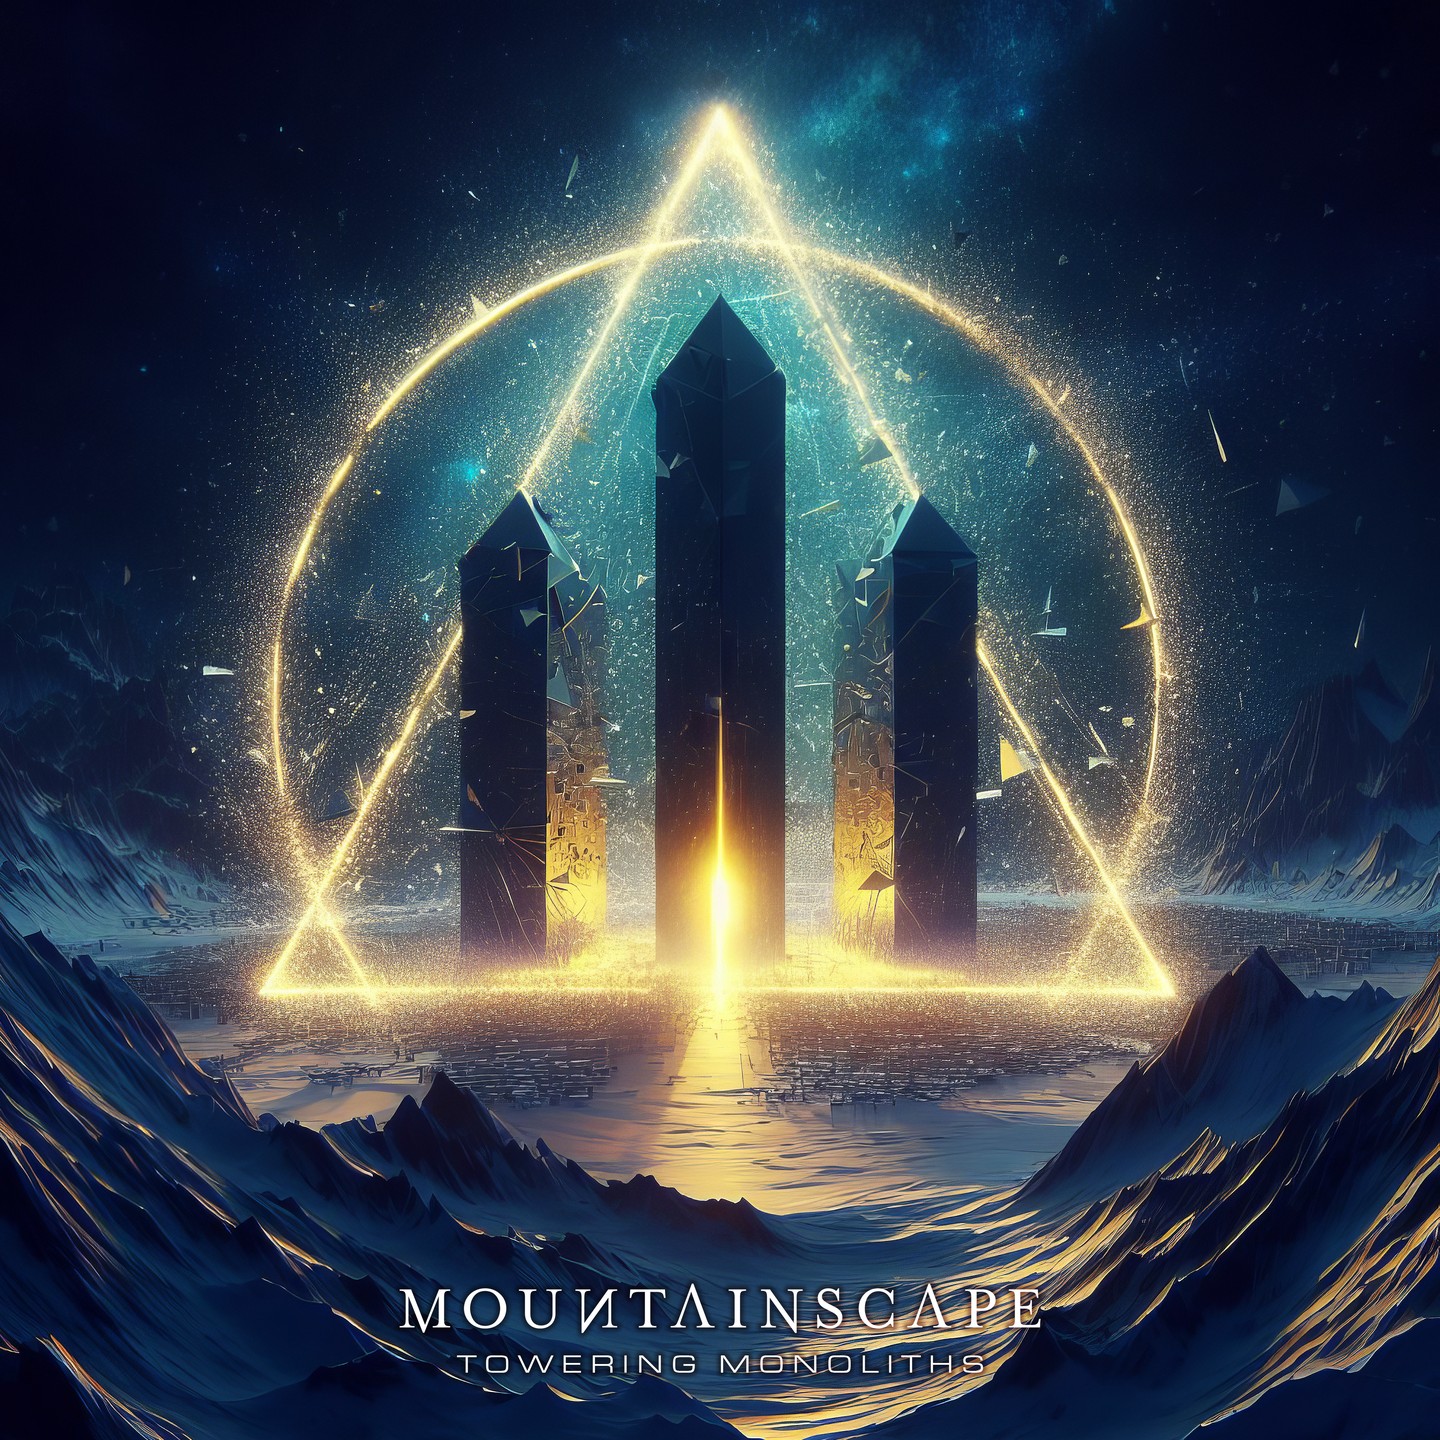 Mountainscape - Towering Monoliths